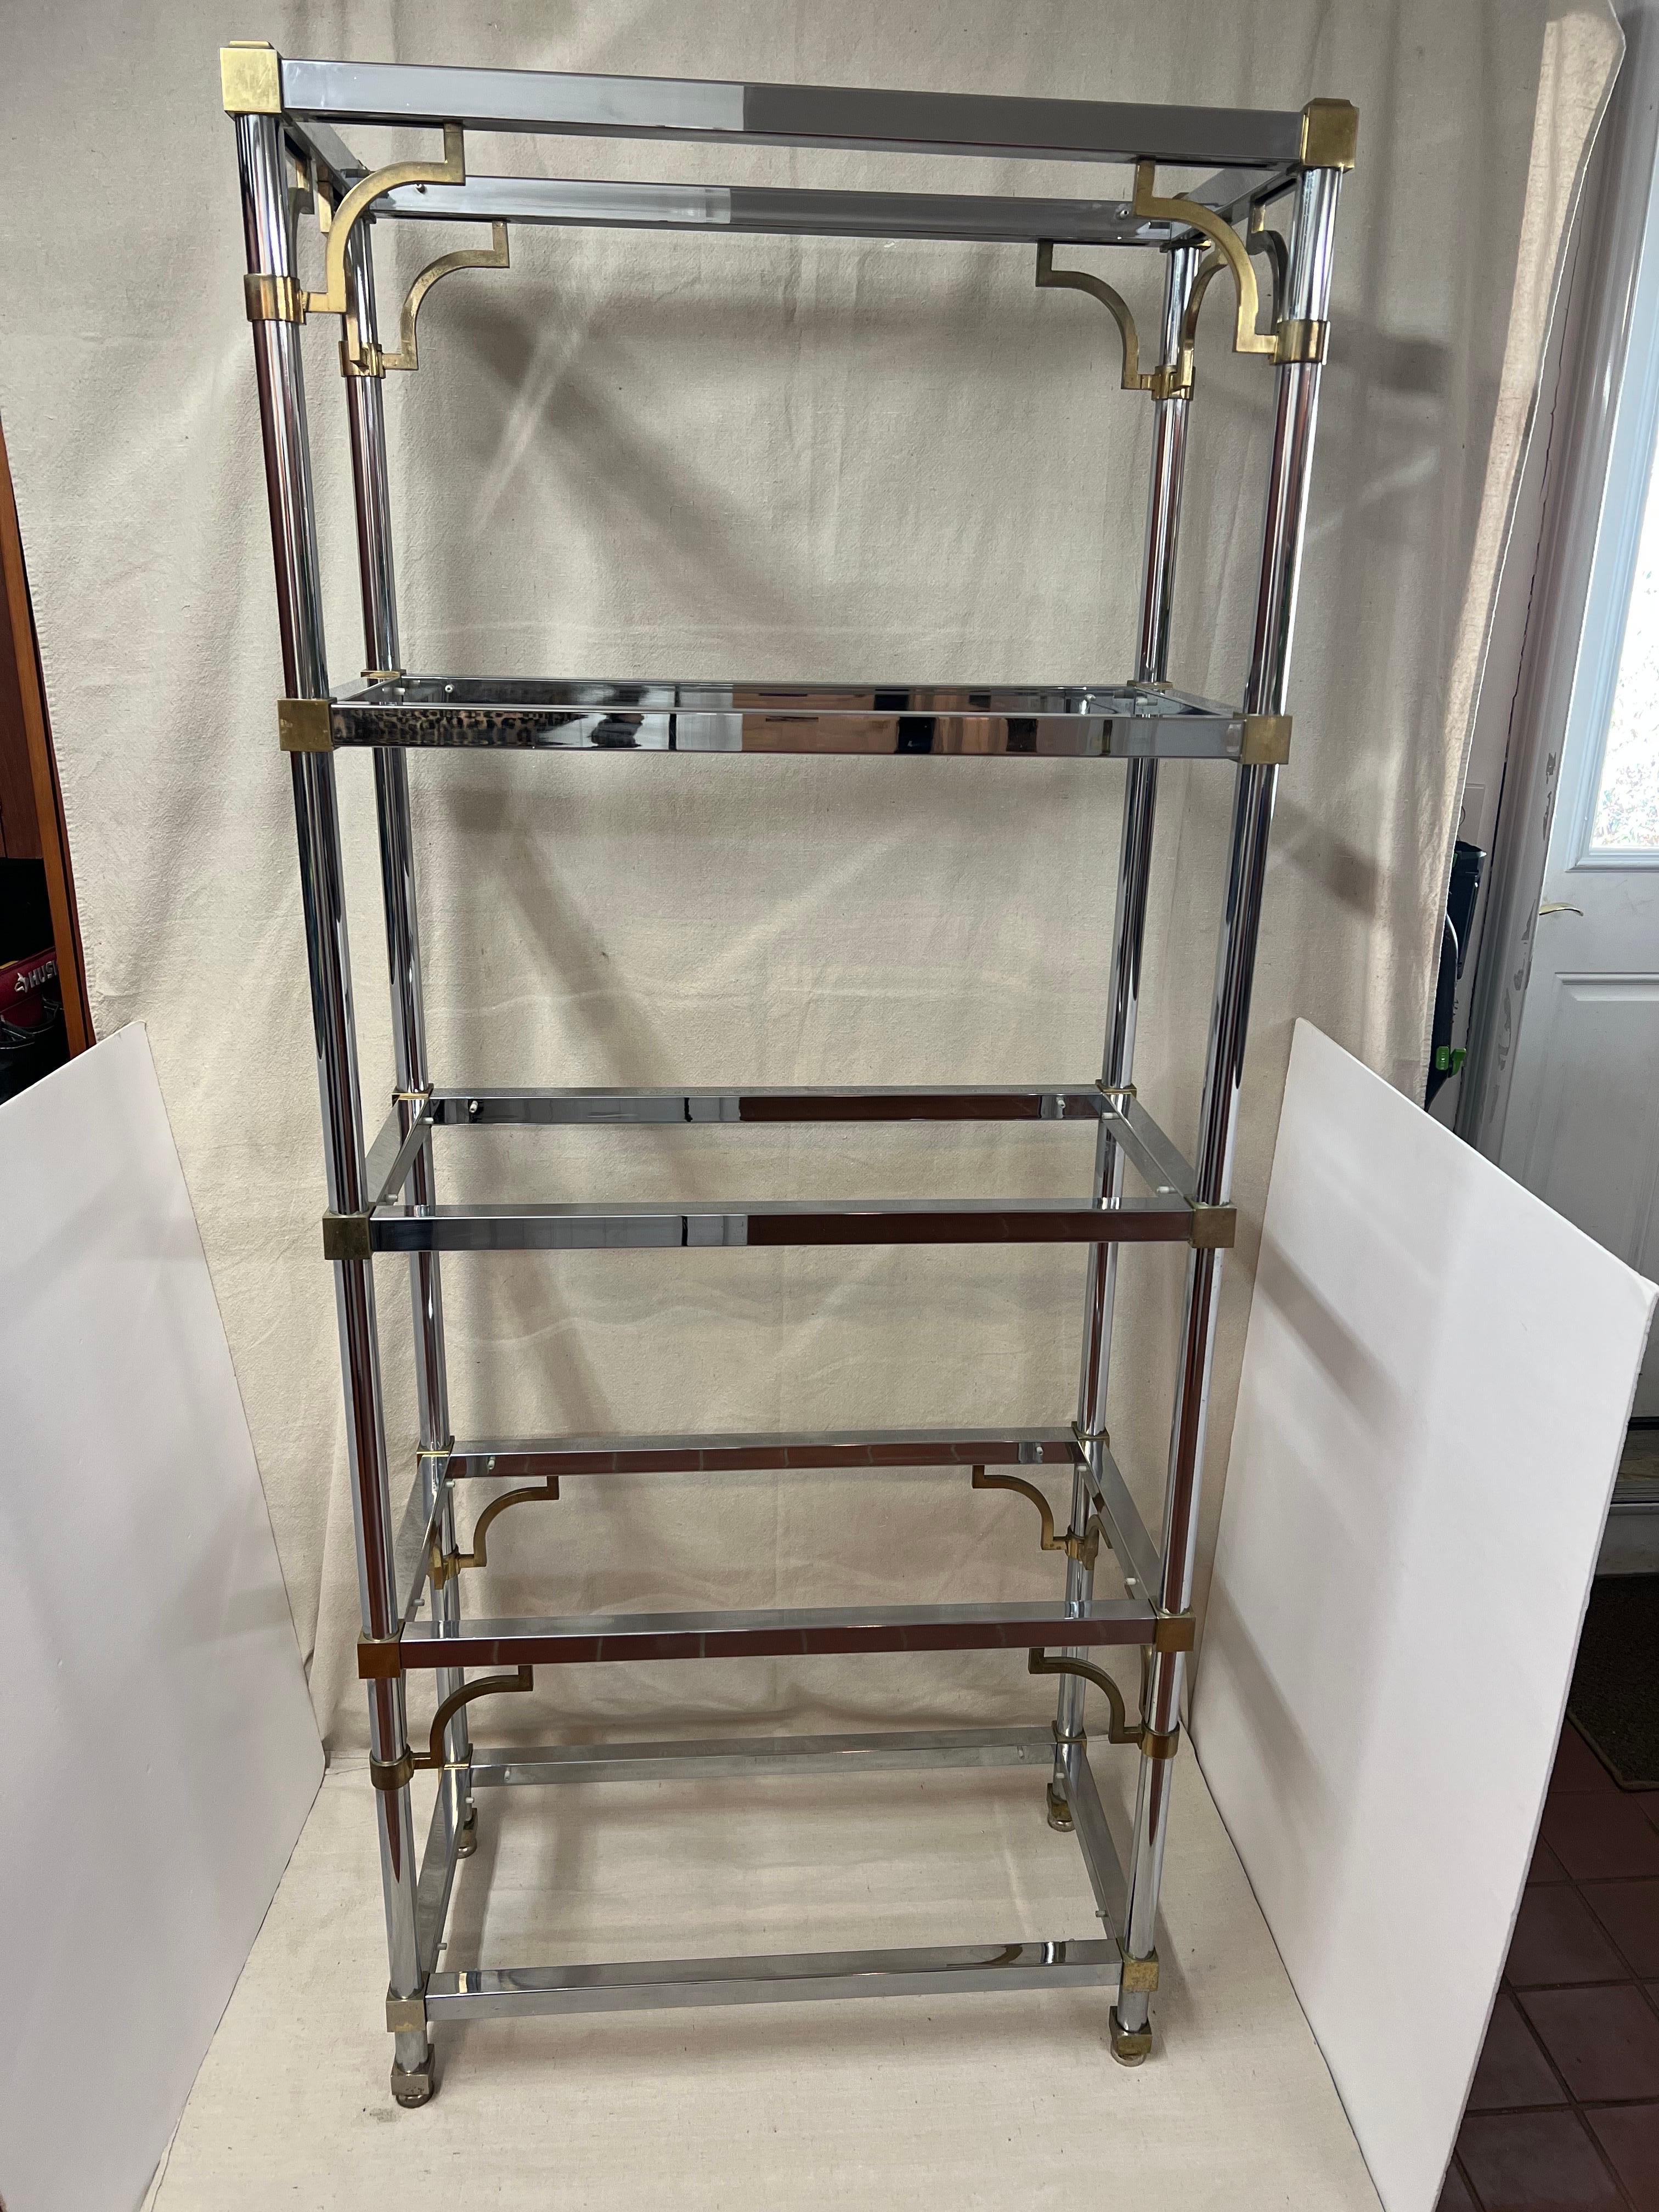 Maison Jansen chrome and brass Greek Key Etagere. Classic Directoire design with Greek key accents in brass to contrast with the chrome. Consisting of 5 shelves total including the top one. Great piece for books, decorative accessories or to show